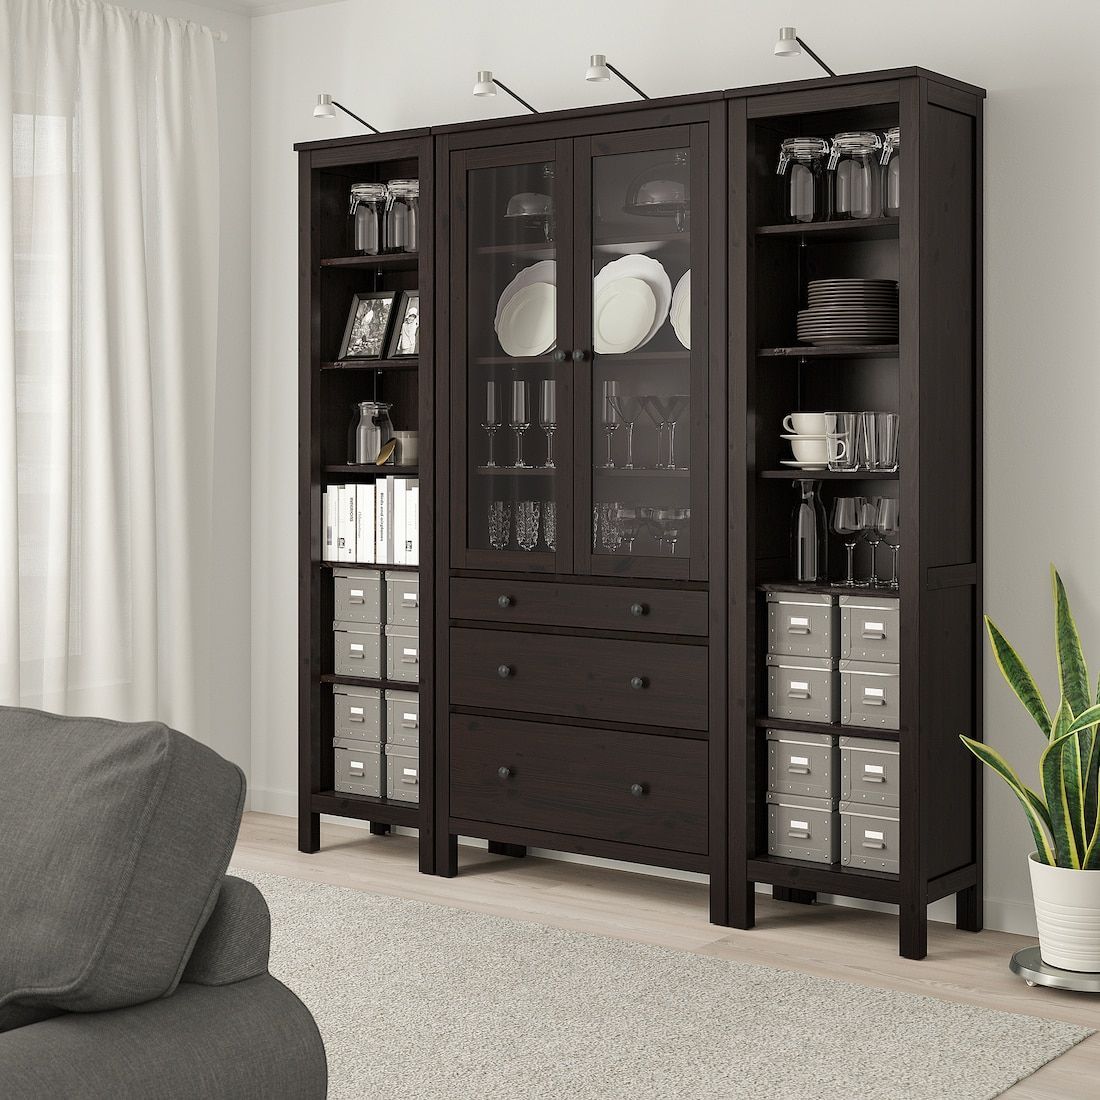 Hemnes Storage Combination W Doors/drawers – Black Brown With Regard To Dark Brown Tv Cabinets With 2 Sliding Doors And Drawer (View 13 of 15)